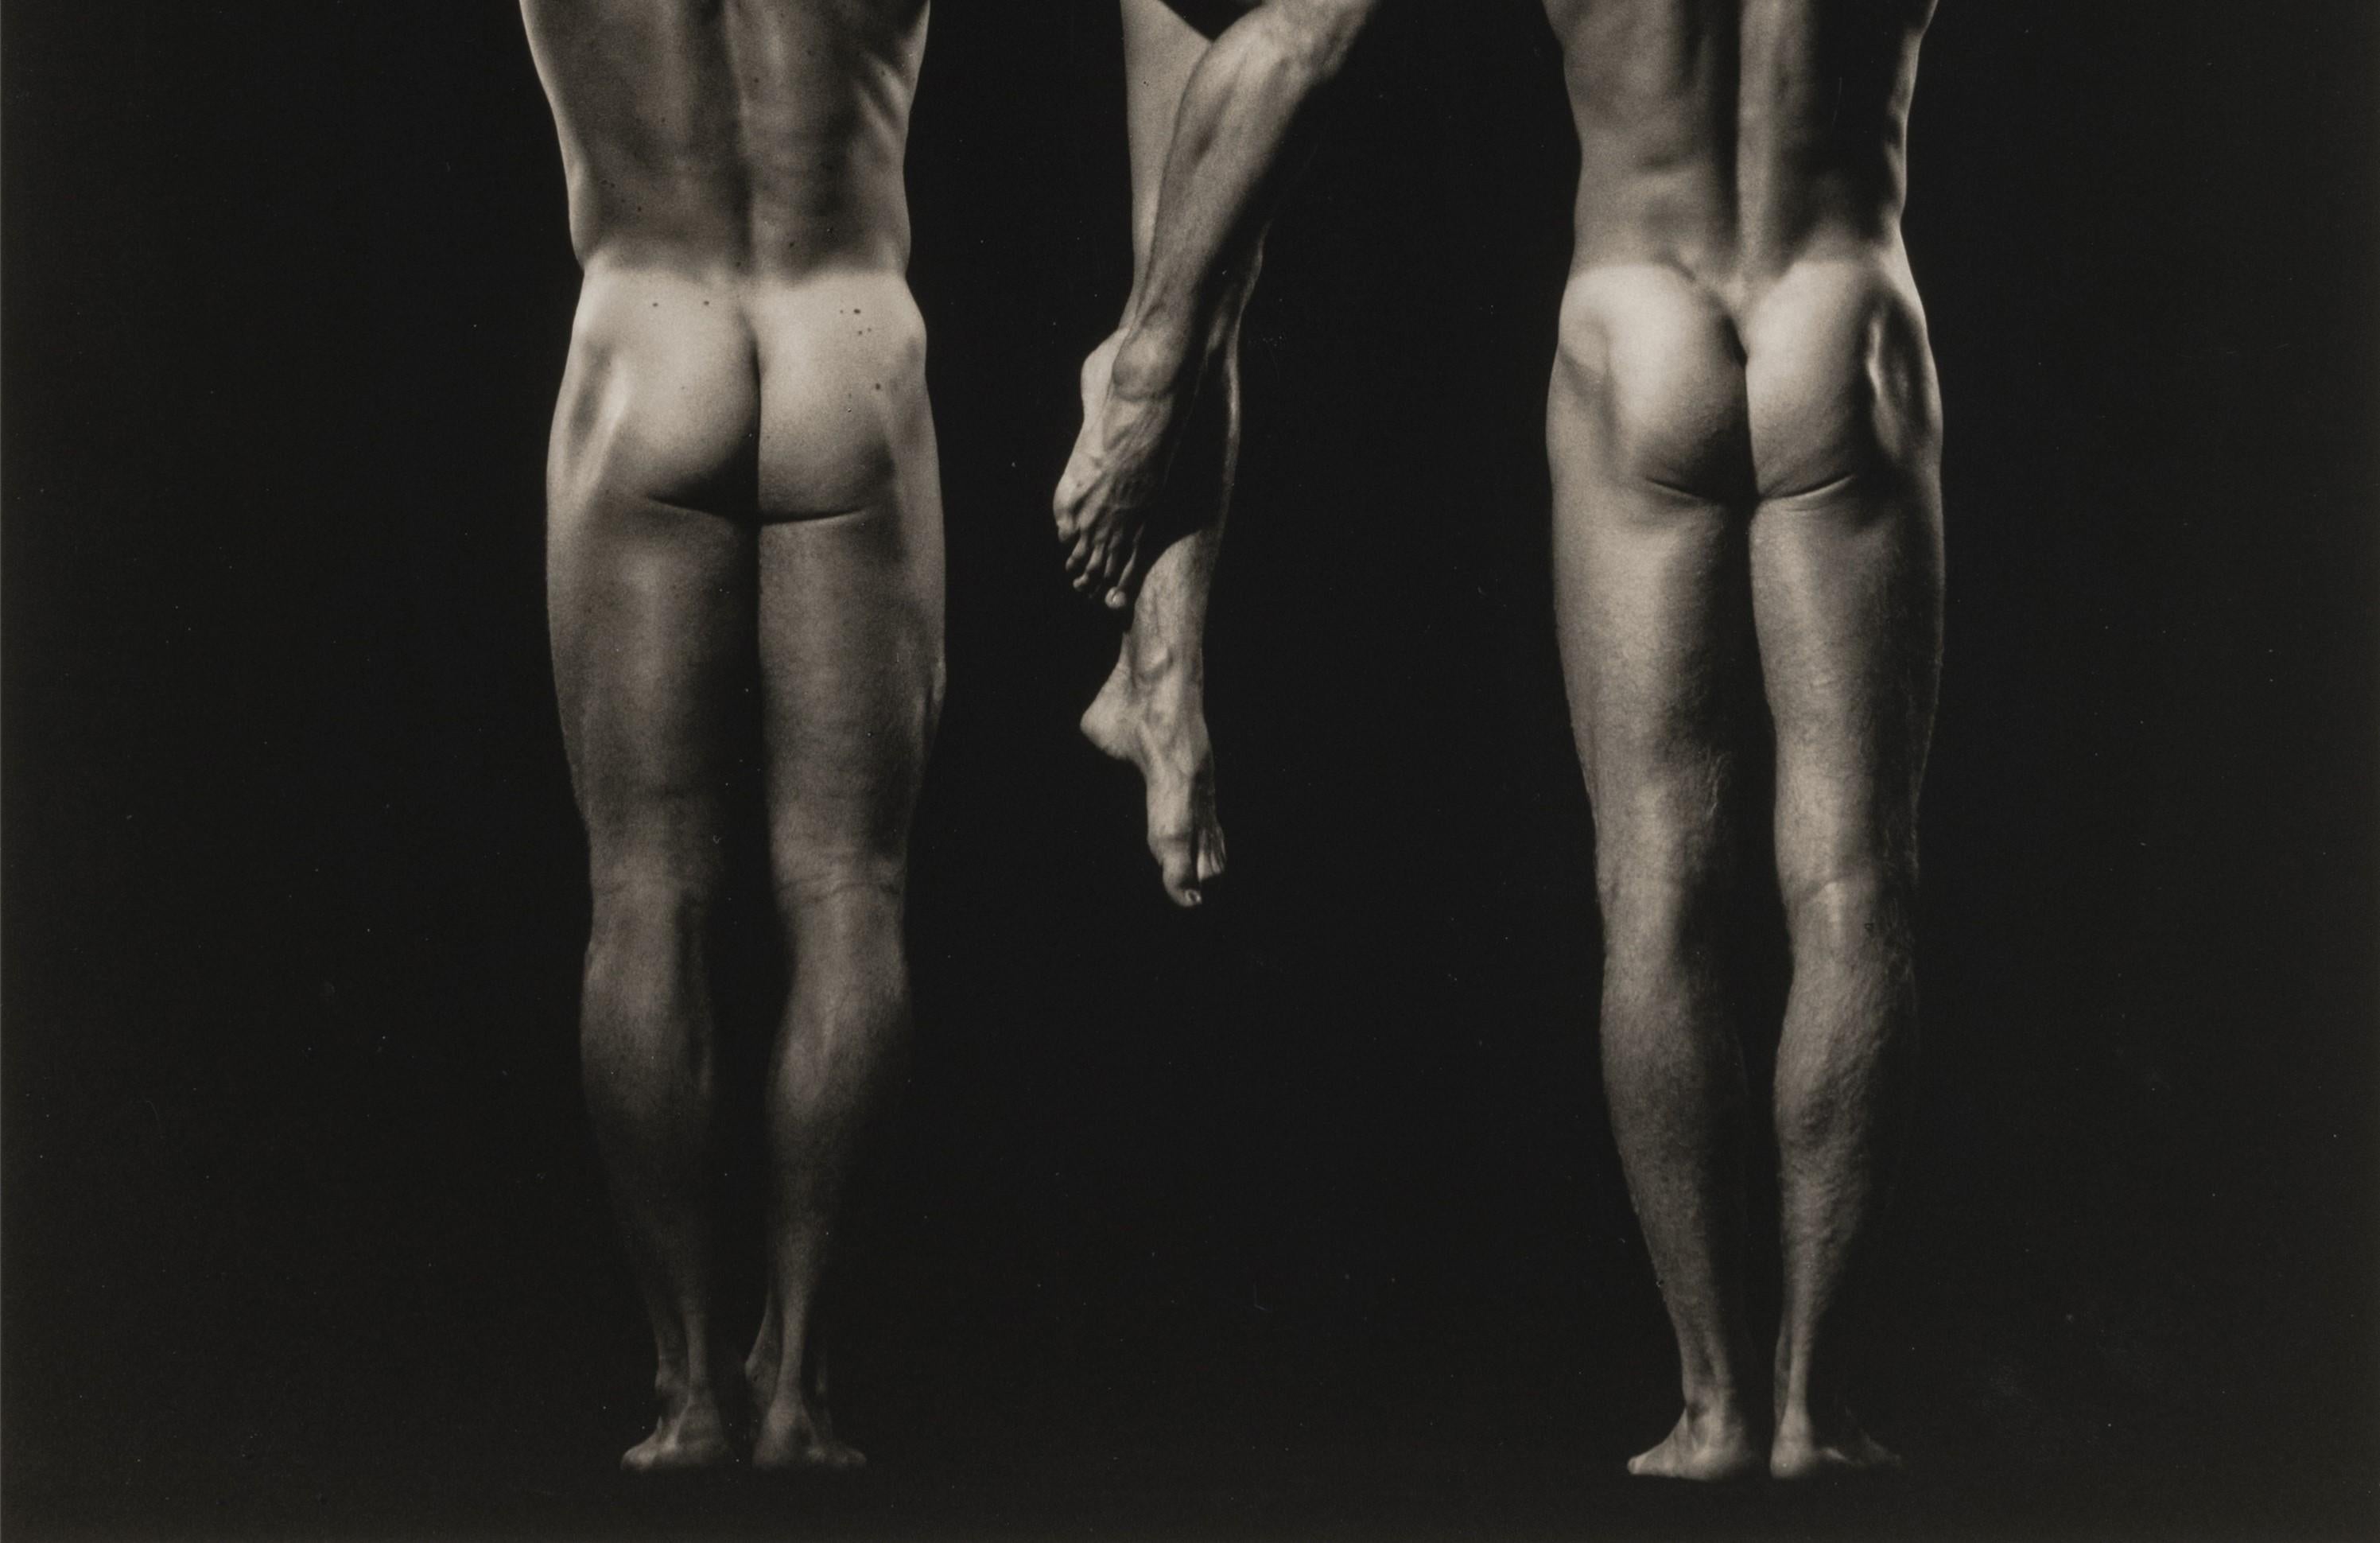 Toned silver gelatin print (printed 2003), signed, dated and numbered (verso), edition '20/25', 33cm x 26cm (image size), (49cm x 41cm framed). (N.B. although this is an edition of 25, only 20 were ever printed.)

“Anderson & Low” have worked